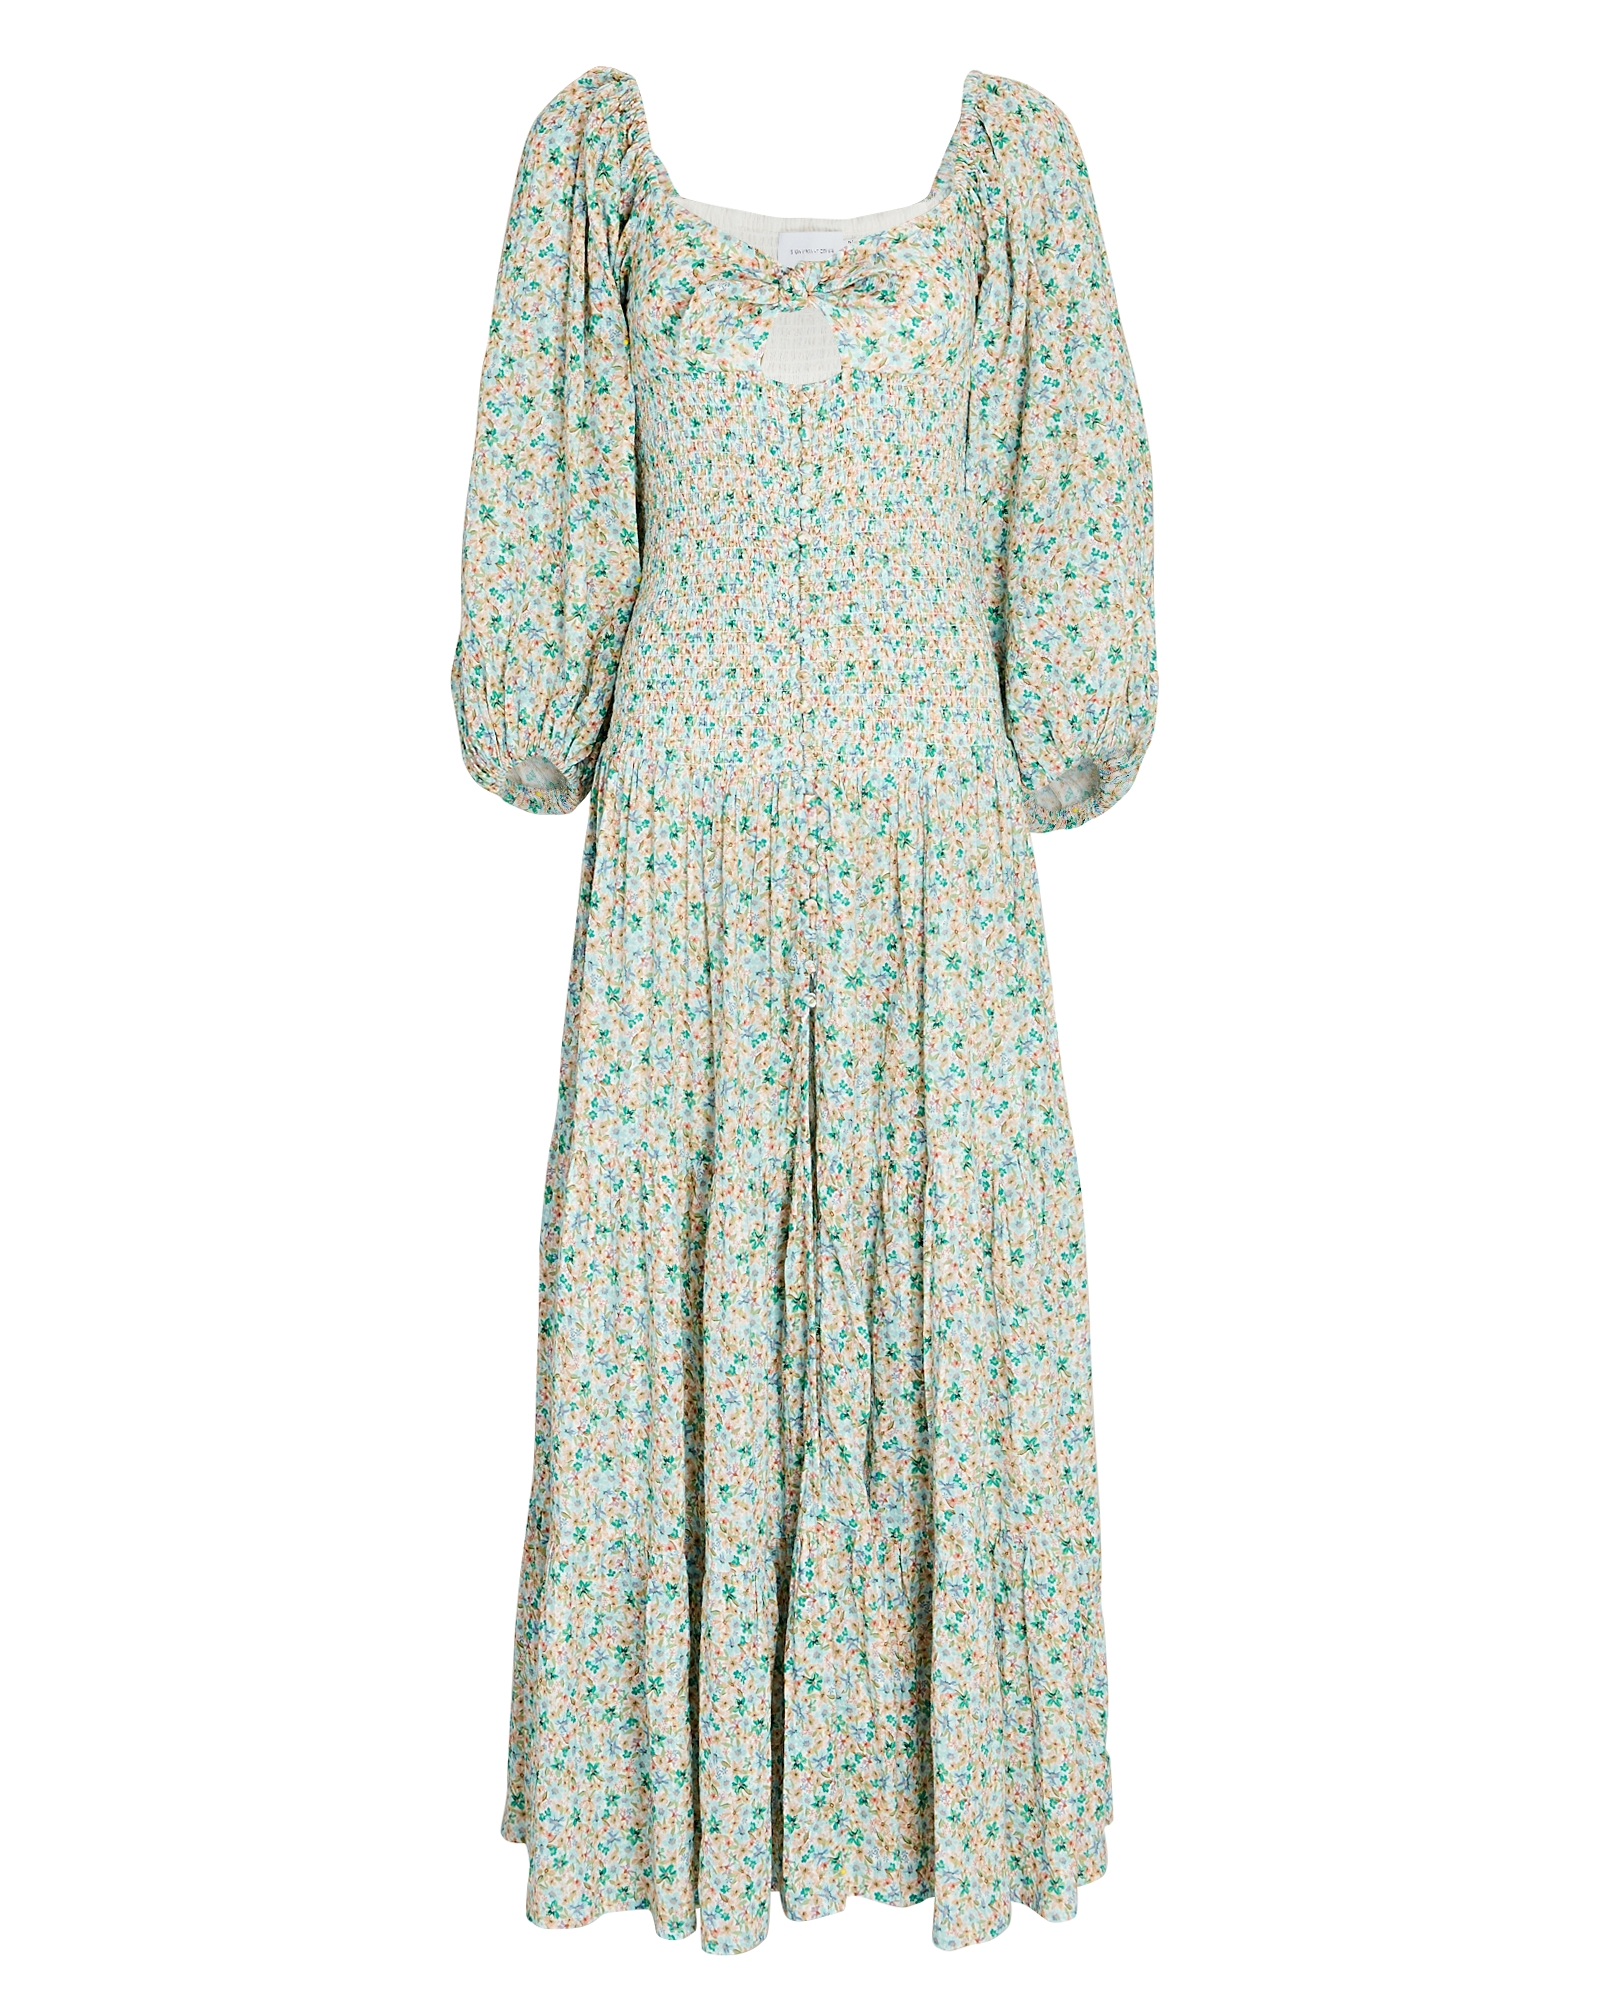 Significant Other Paloma Floral Cotton Maxi Dress | INTERMIX®